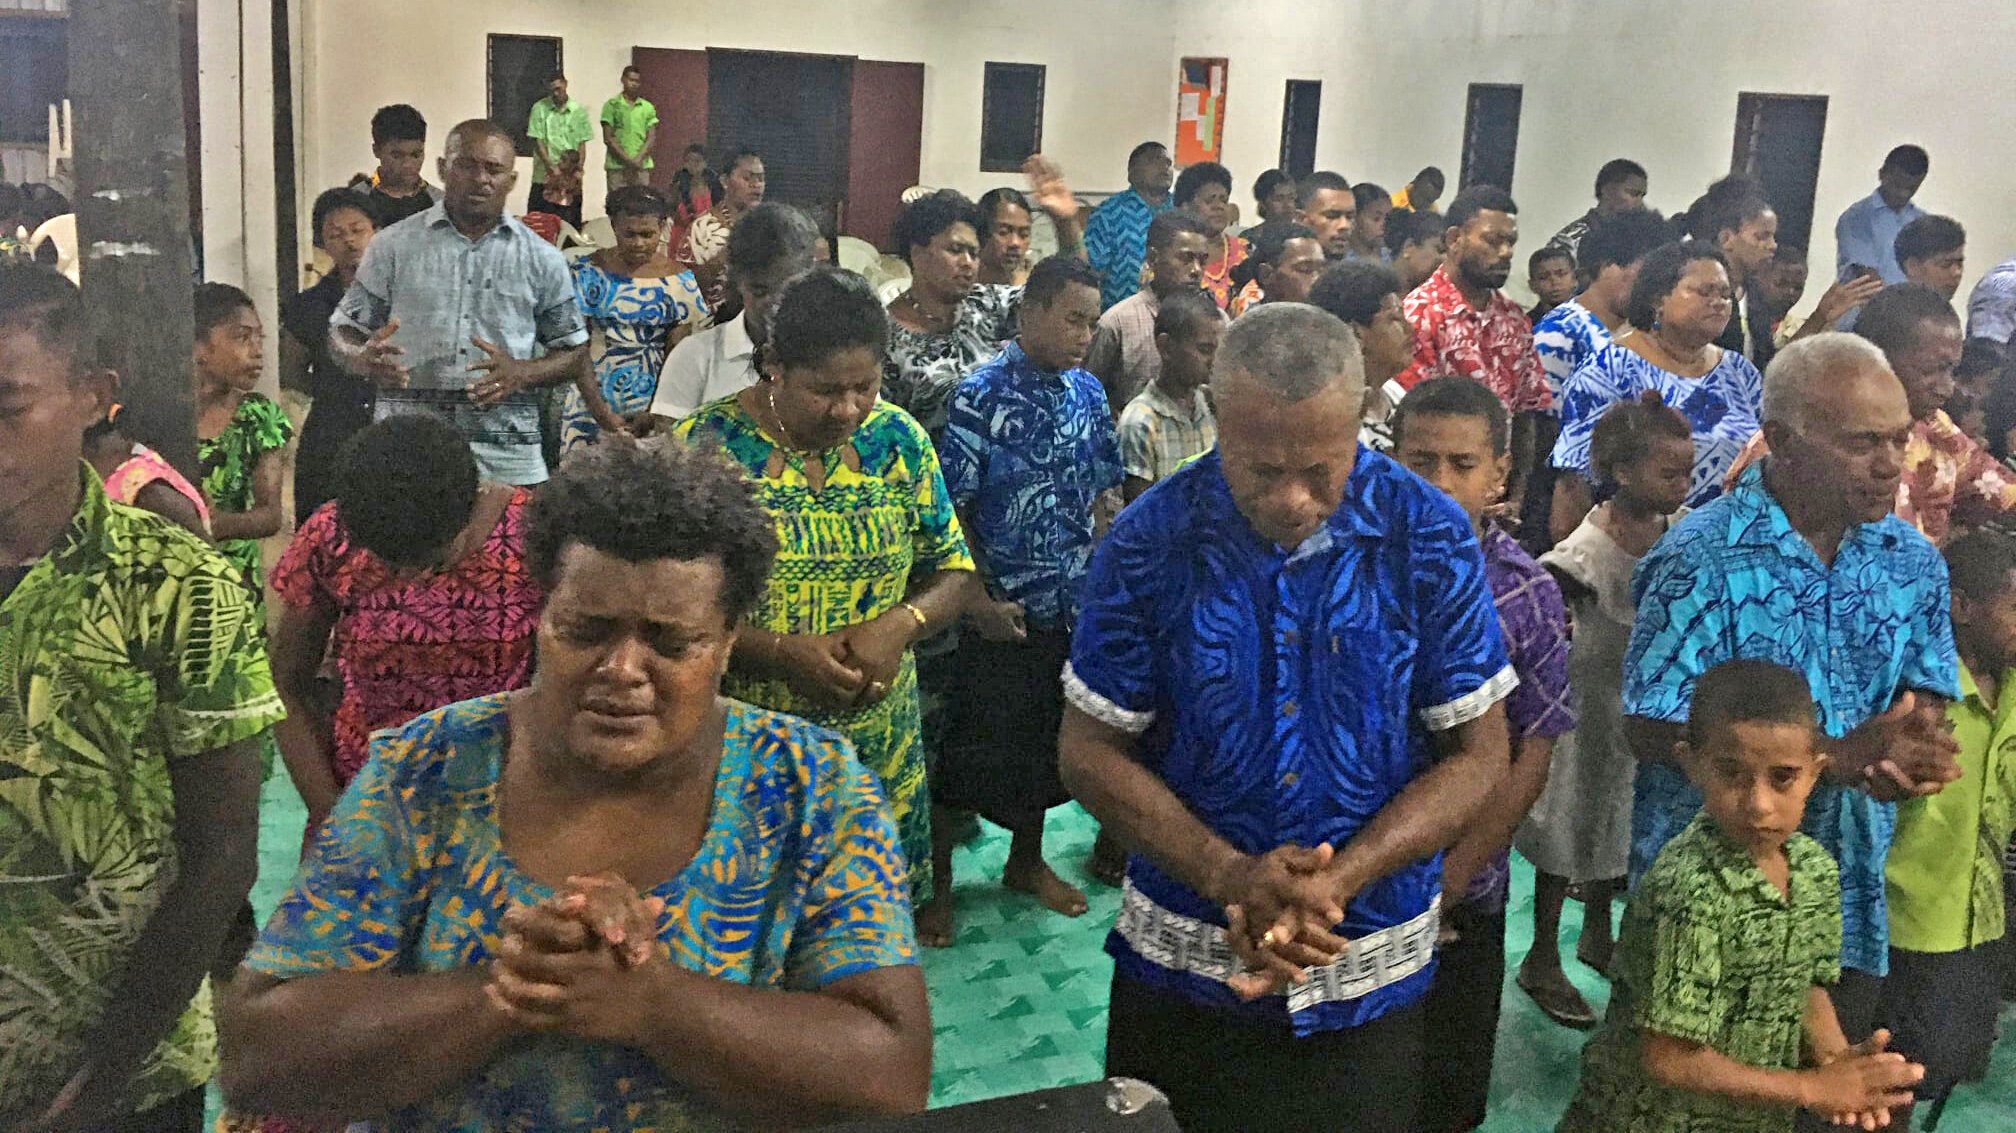 The church in Fiji praying for protection, for the storms to stop, and for God to use them to bless those impacted by the storms.